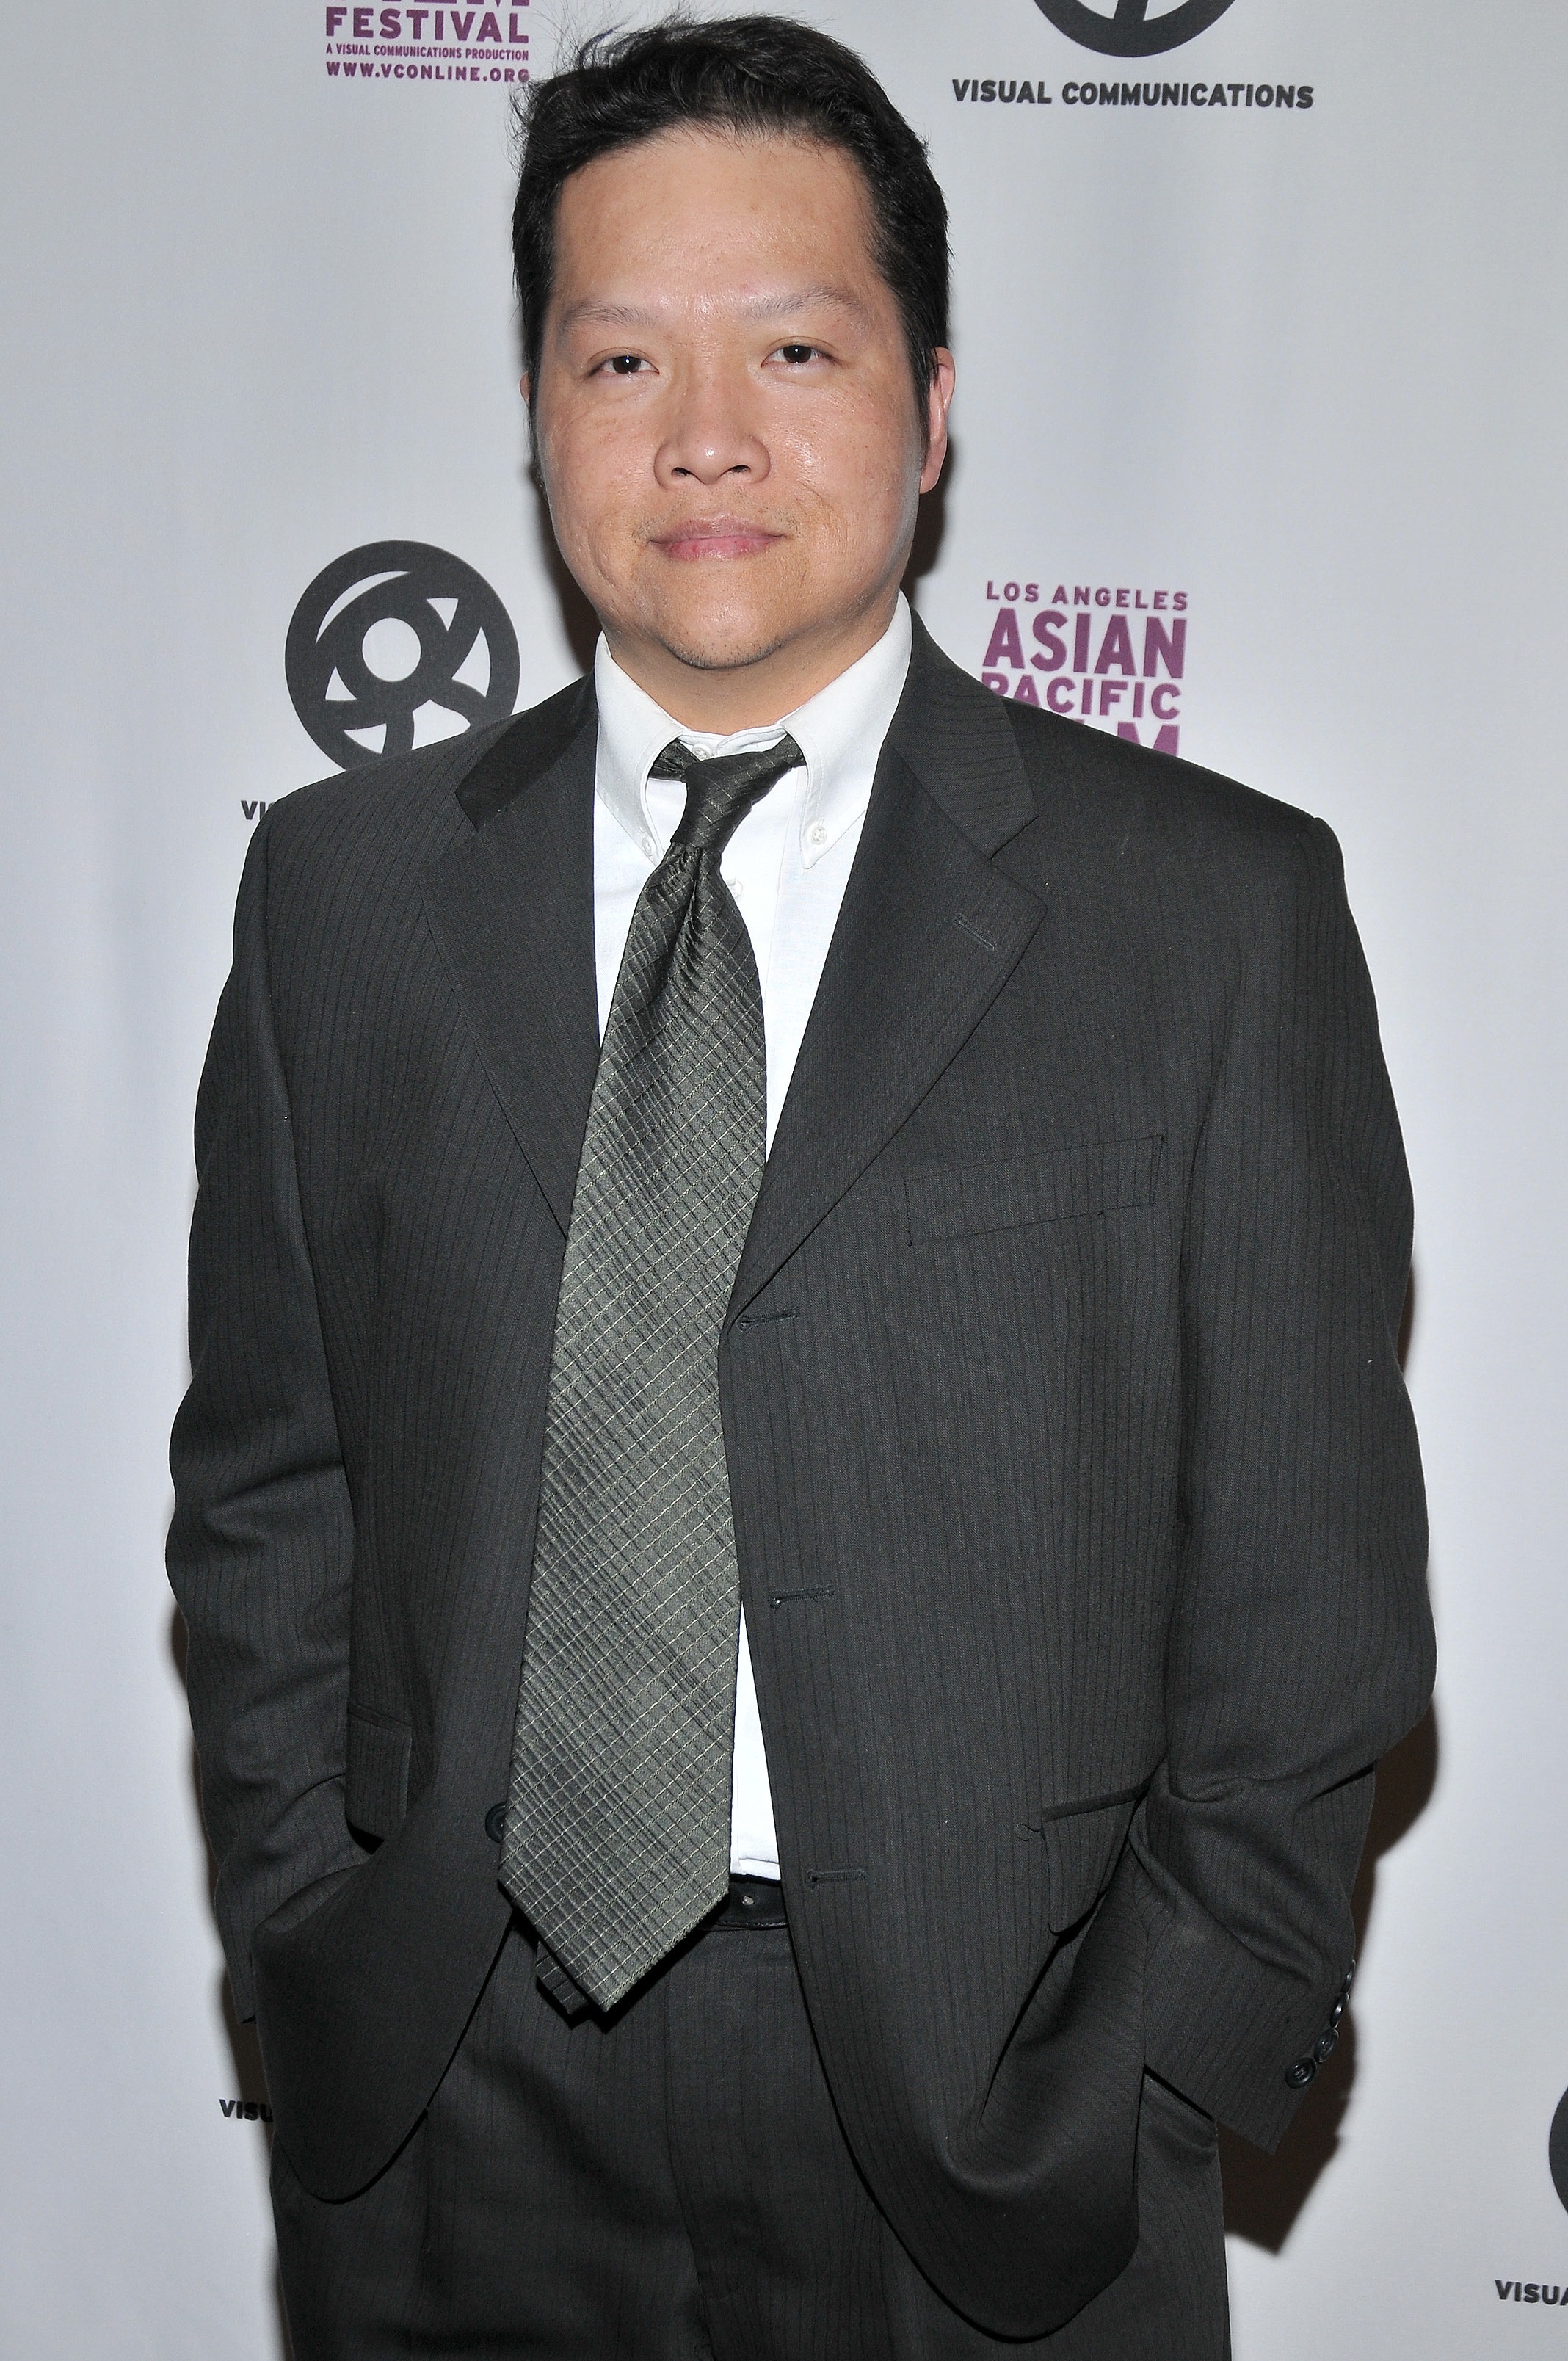 Edwin A. Santos at the Los Angeles Asian Pacific Film Festival's Opening Night Gala at the Directors Guild of America; April 29, 2010